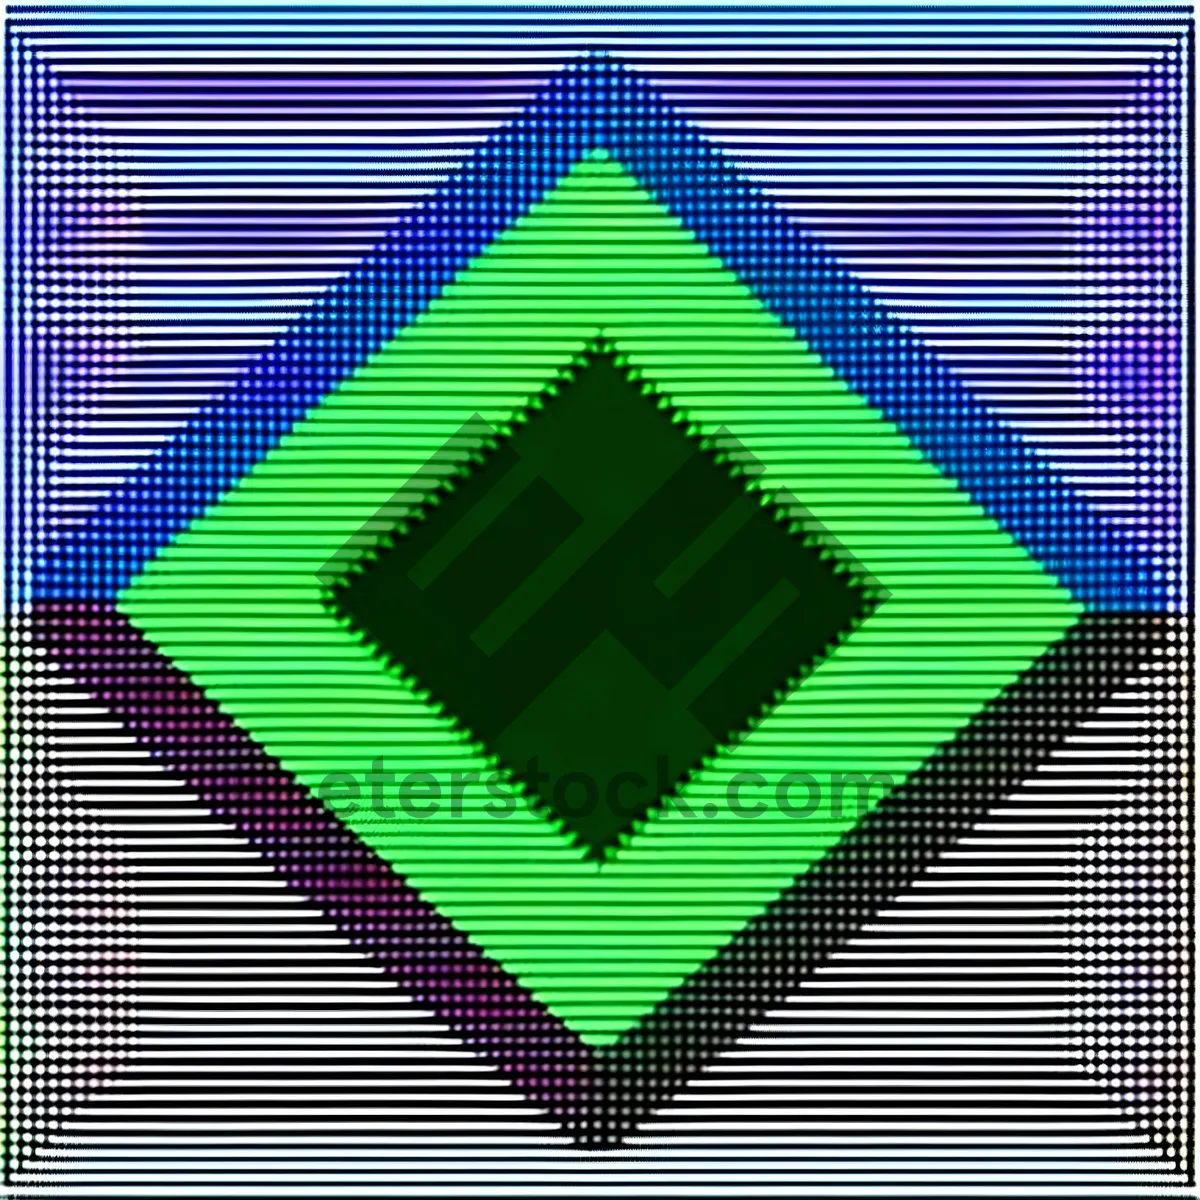 Picture of Modern Art Mosaic Design: Colorful Halftone Circle Grid